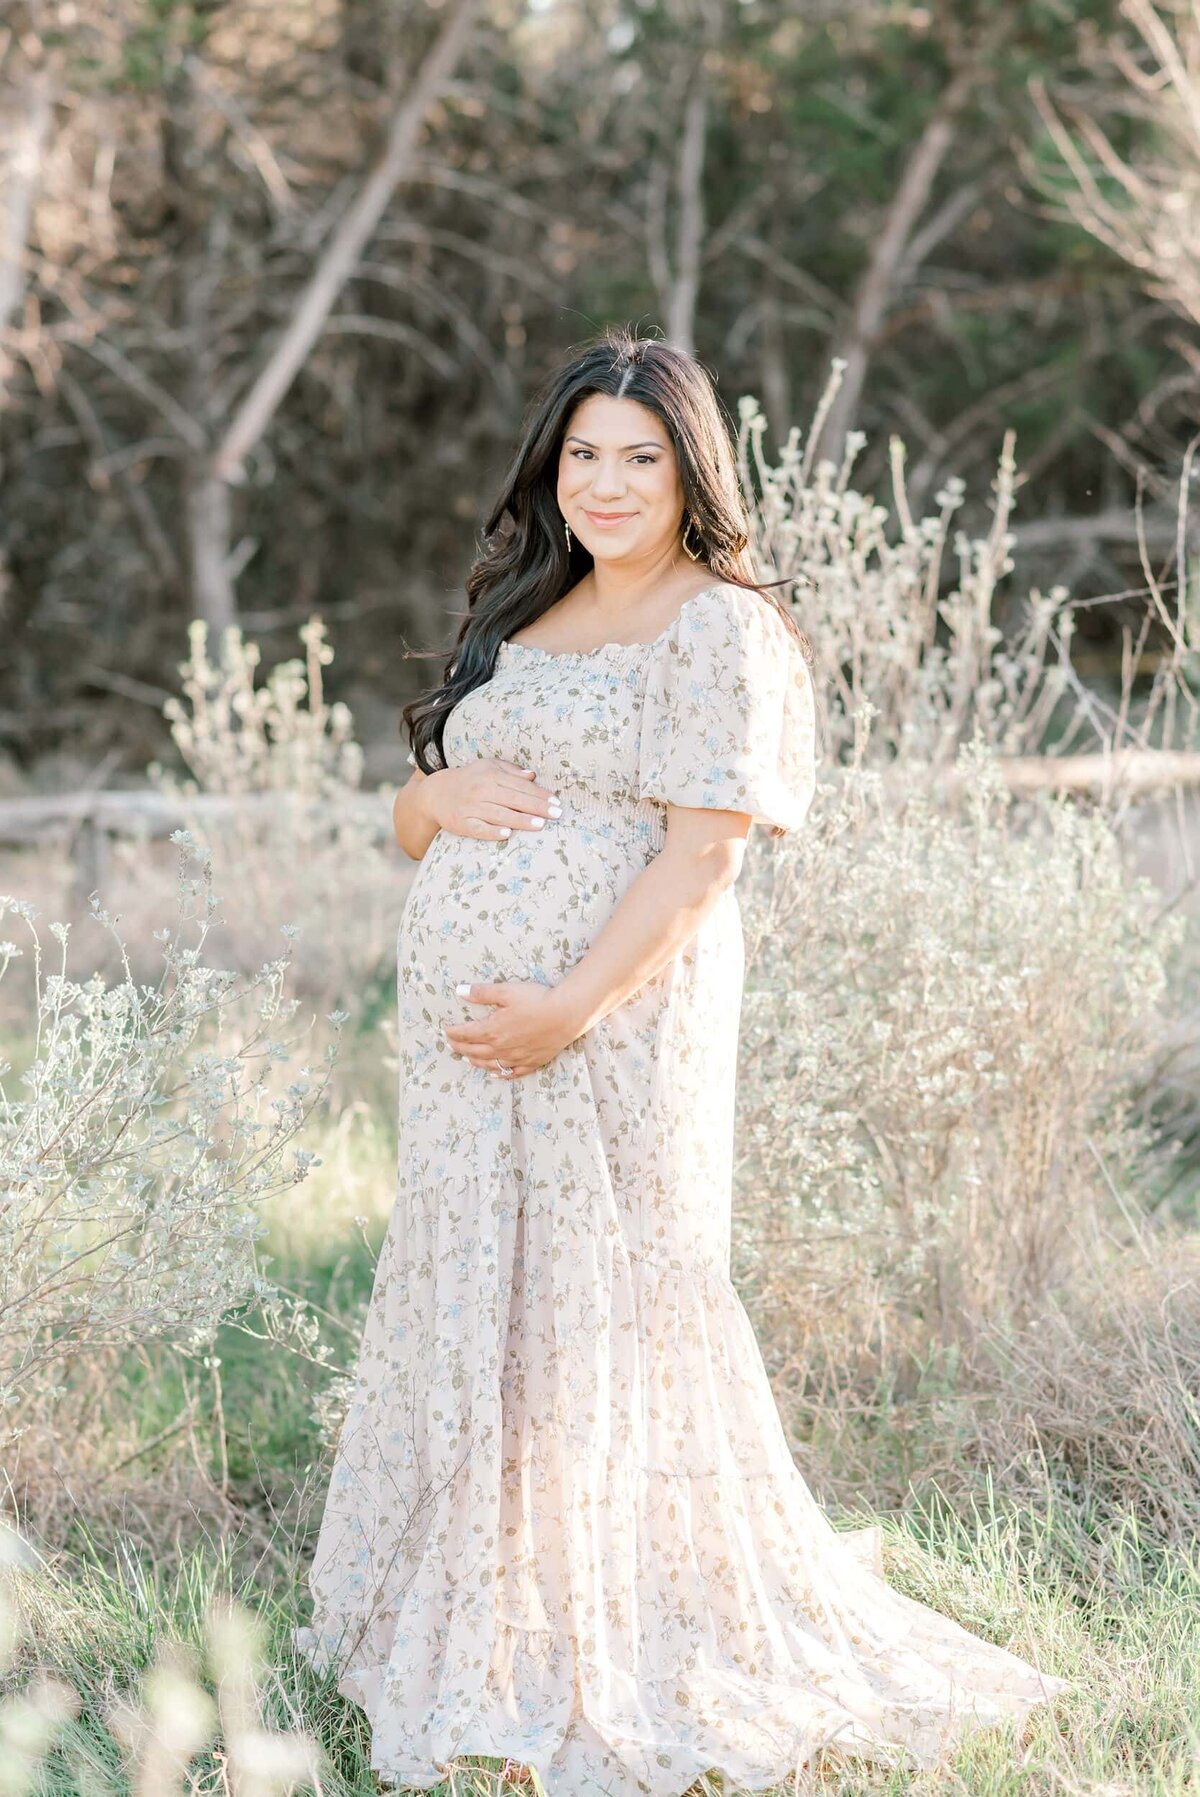 San-Antonio-Maternity-Photography-3.4.23- Melanie_s Maternity Session- Laurie Adalle Photography-16